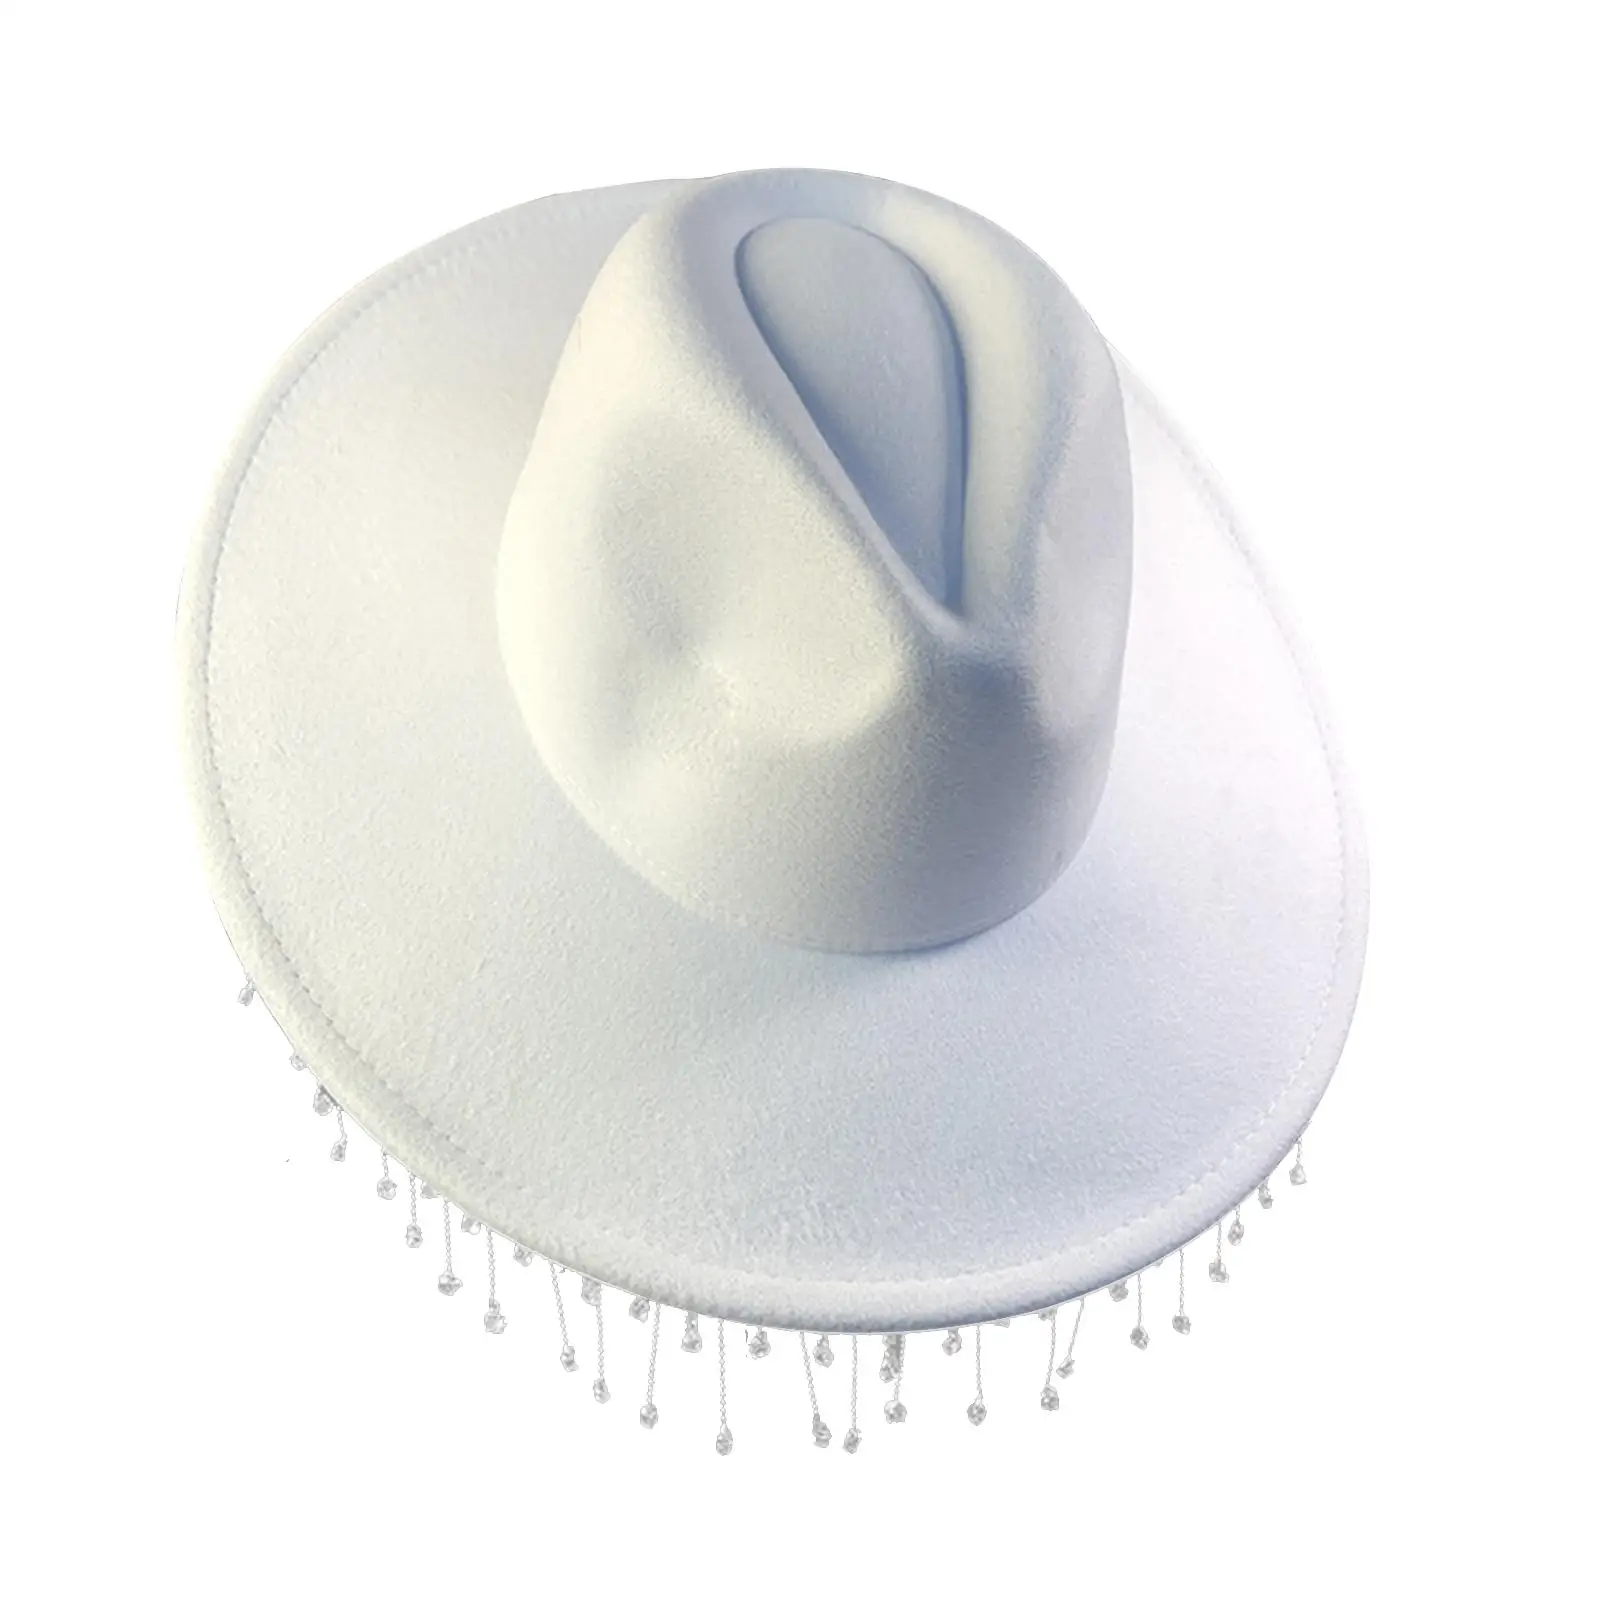 Western Style Felt Cowboy Hat Fedoras Caps Cowgirl Jazz Caps Sunhat with Tassel for Outdoor Holiday Costume Clothes Accessories